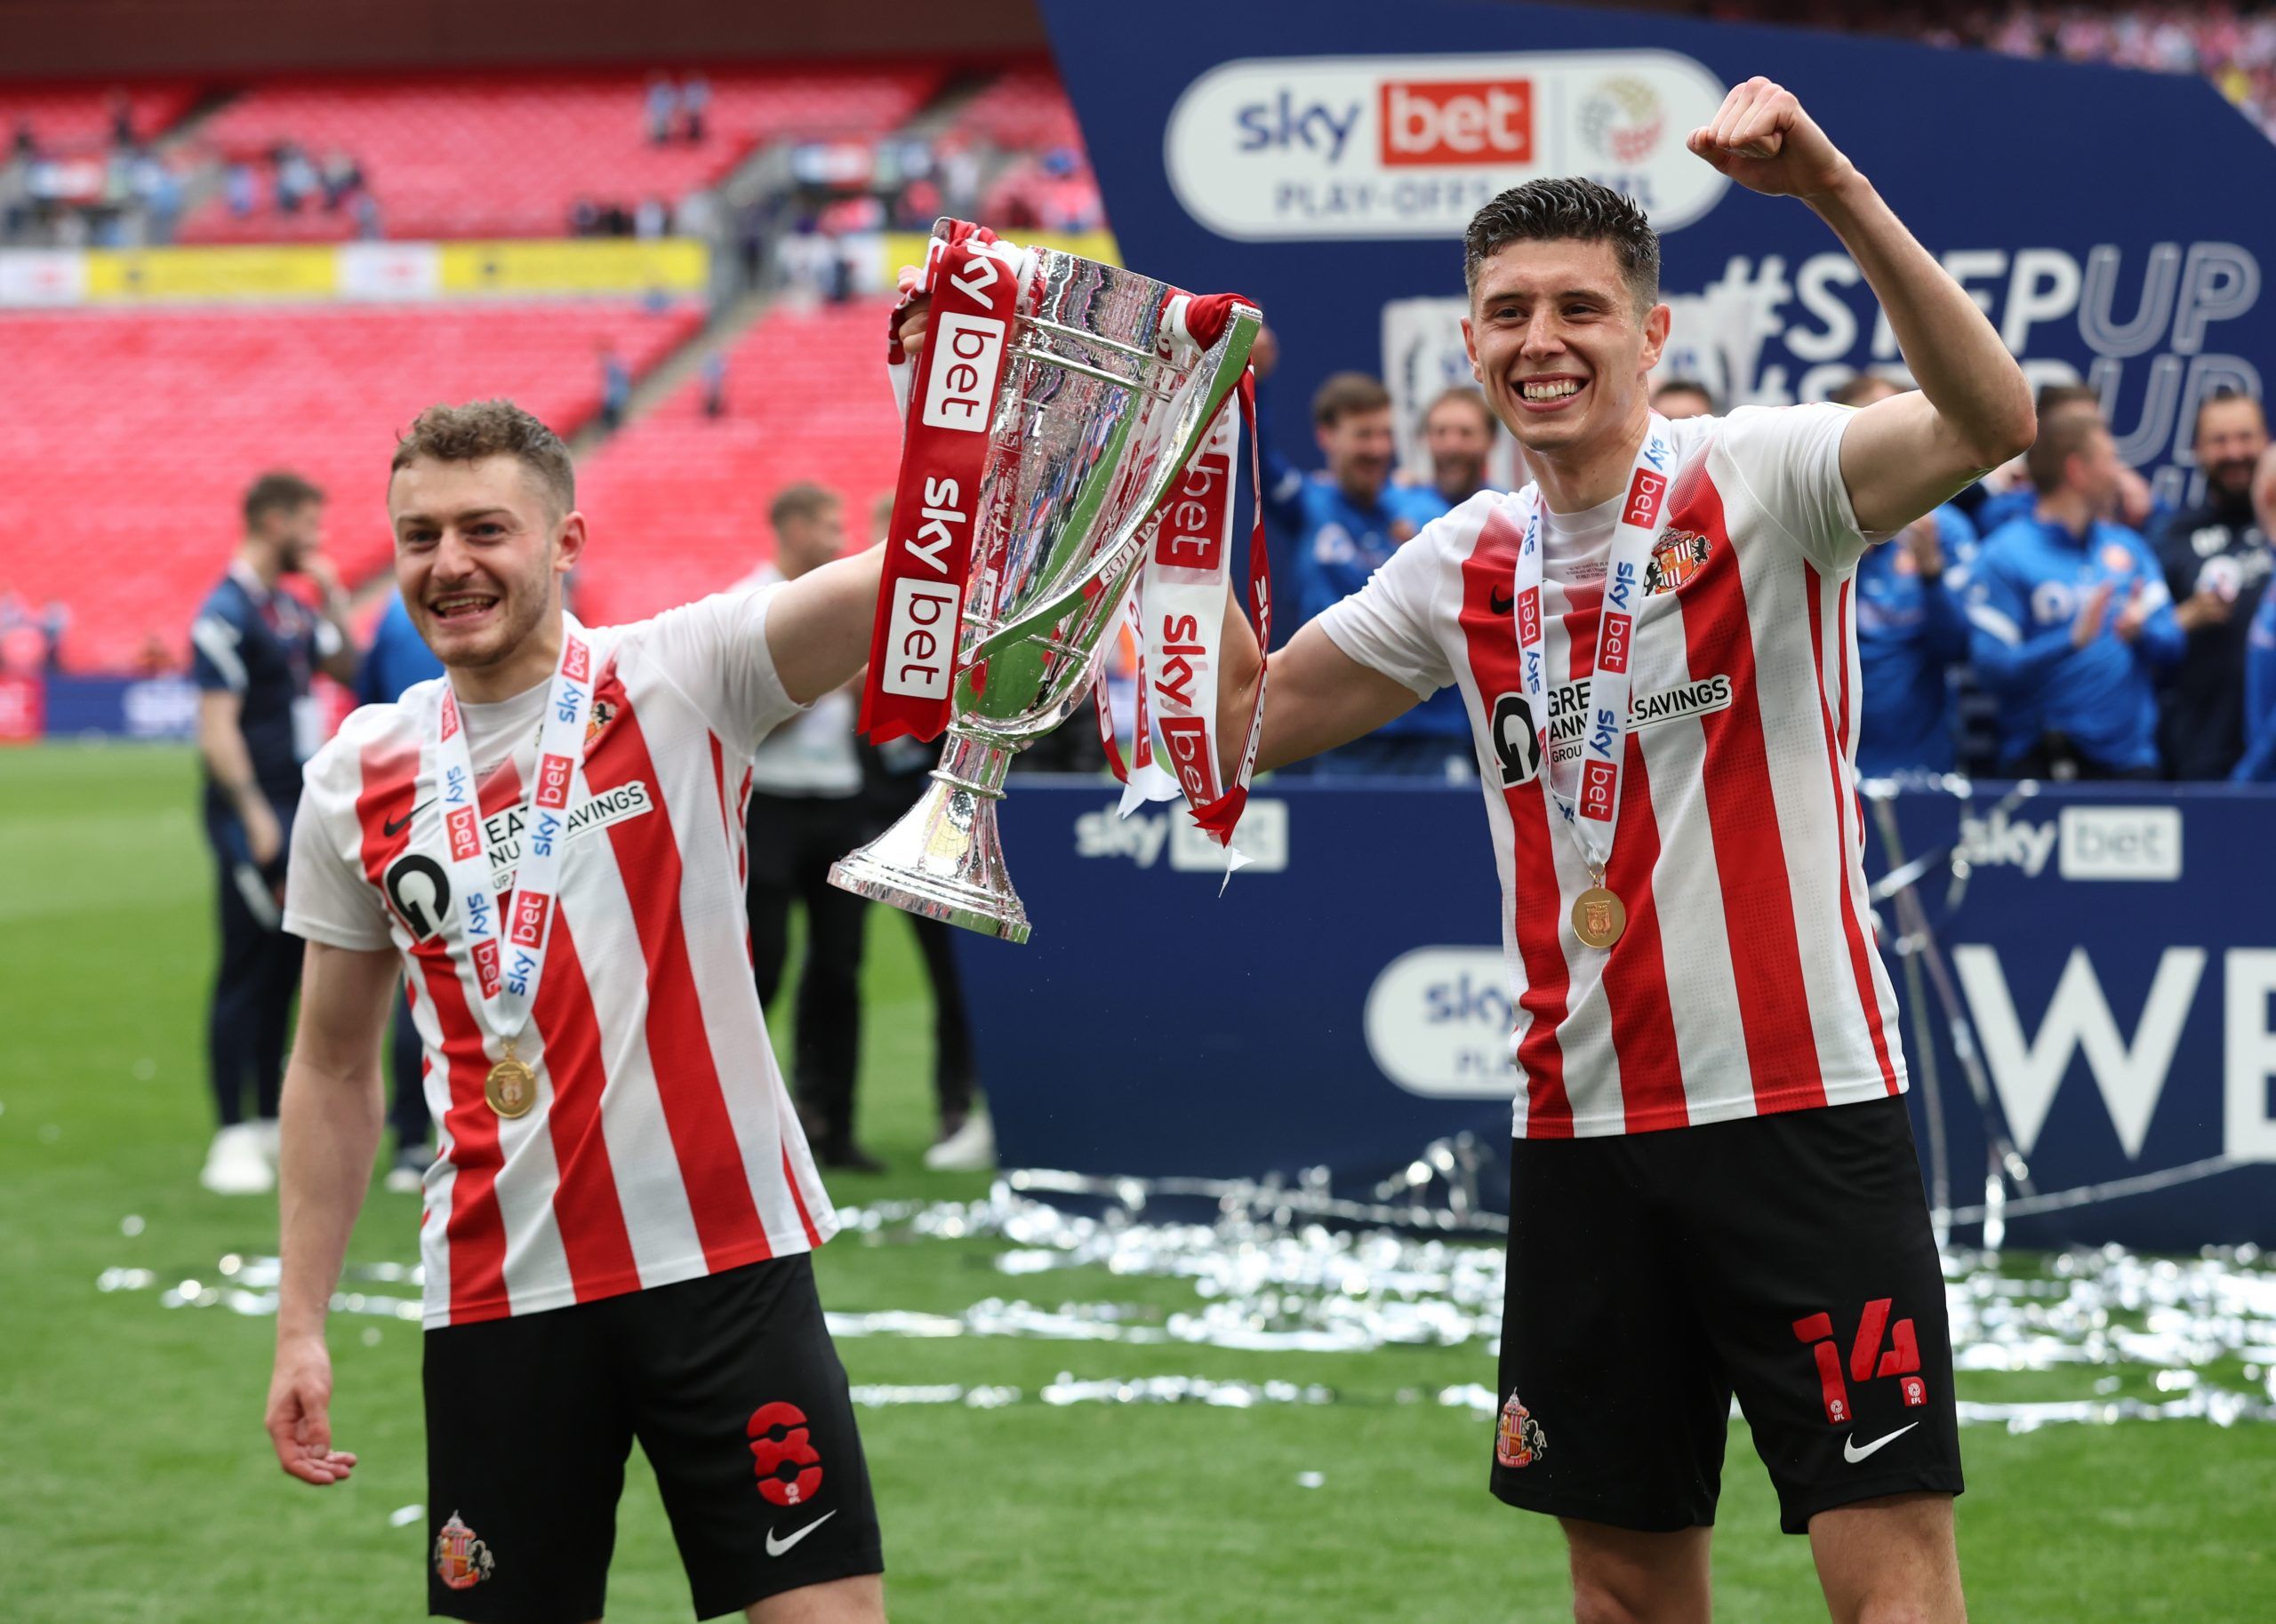 Soccer Football - League One Play-Off Final - Sunderland v Wycombe Wanderers - Wembley Stadium, London, Britain - May 21, 2022  Sunderland's Elliot Embleton and Ross Stewart celebrate with the trophy after winning the League One Play-Off Action Images/Matthew Childs EDITORIAL USE ONLY. No use with unauthorized audio, video, data, fixture lists, club/league logos or 'live' services. Online in-match use limited to 75 images, no video emulation. No use in betting, games or single club /league/playe